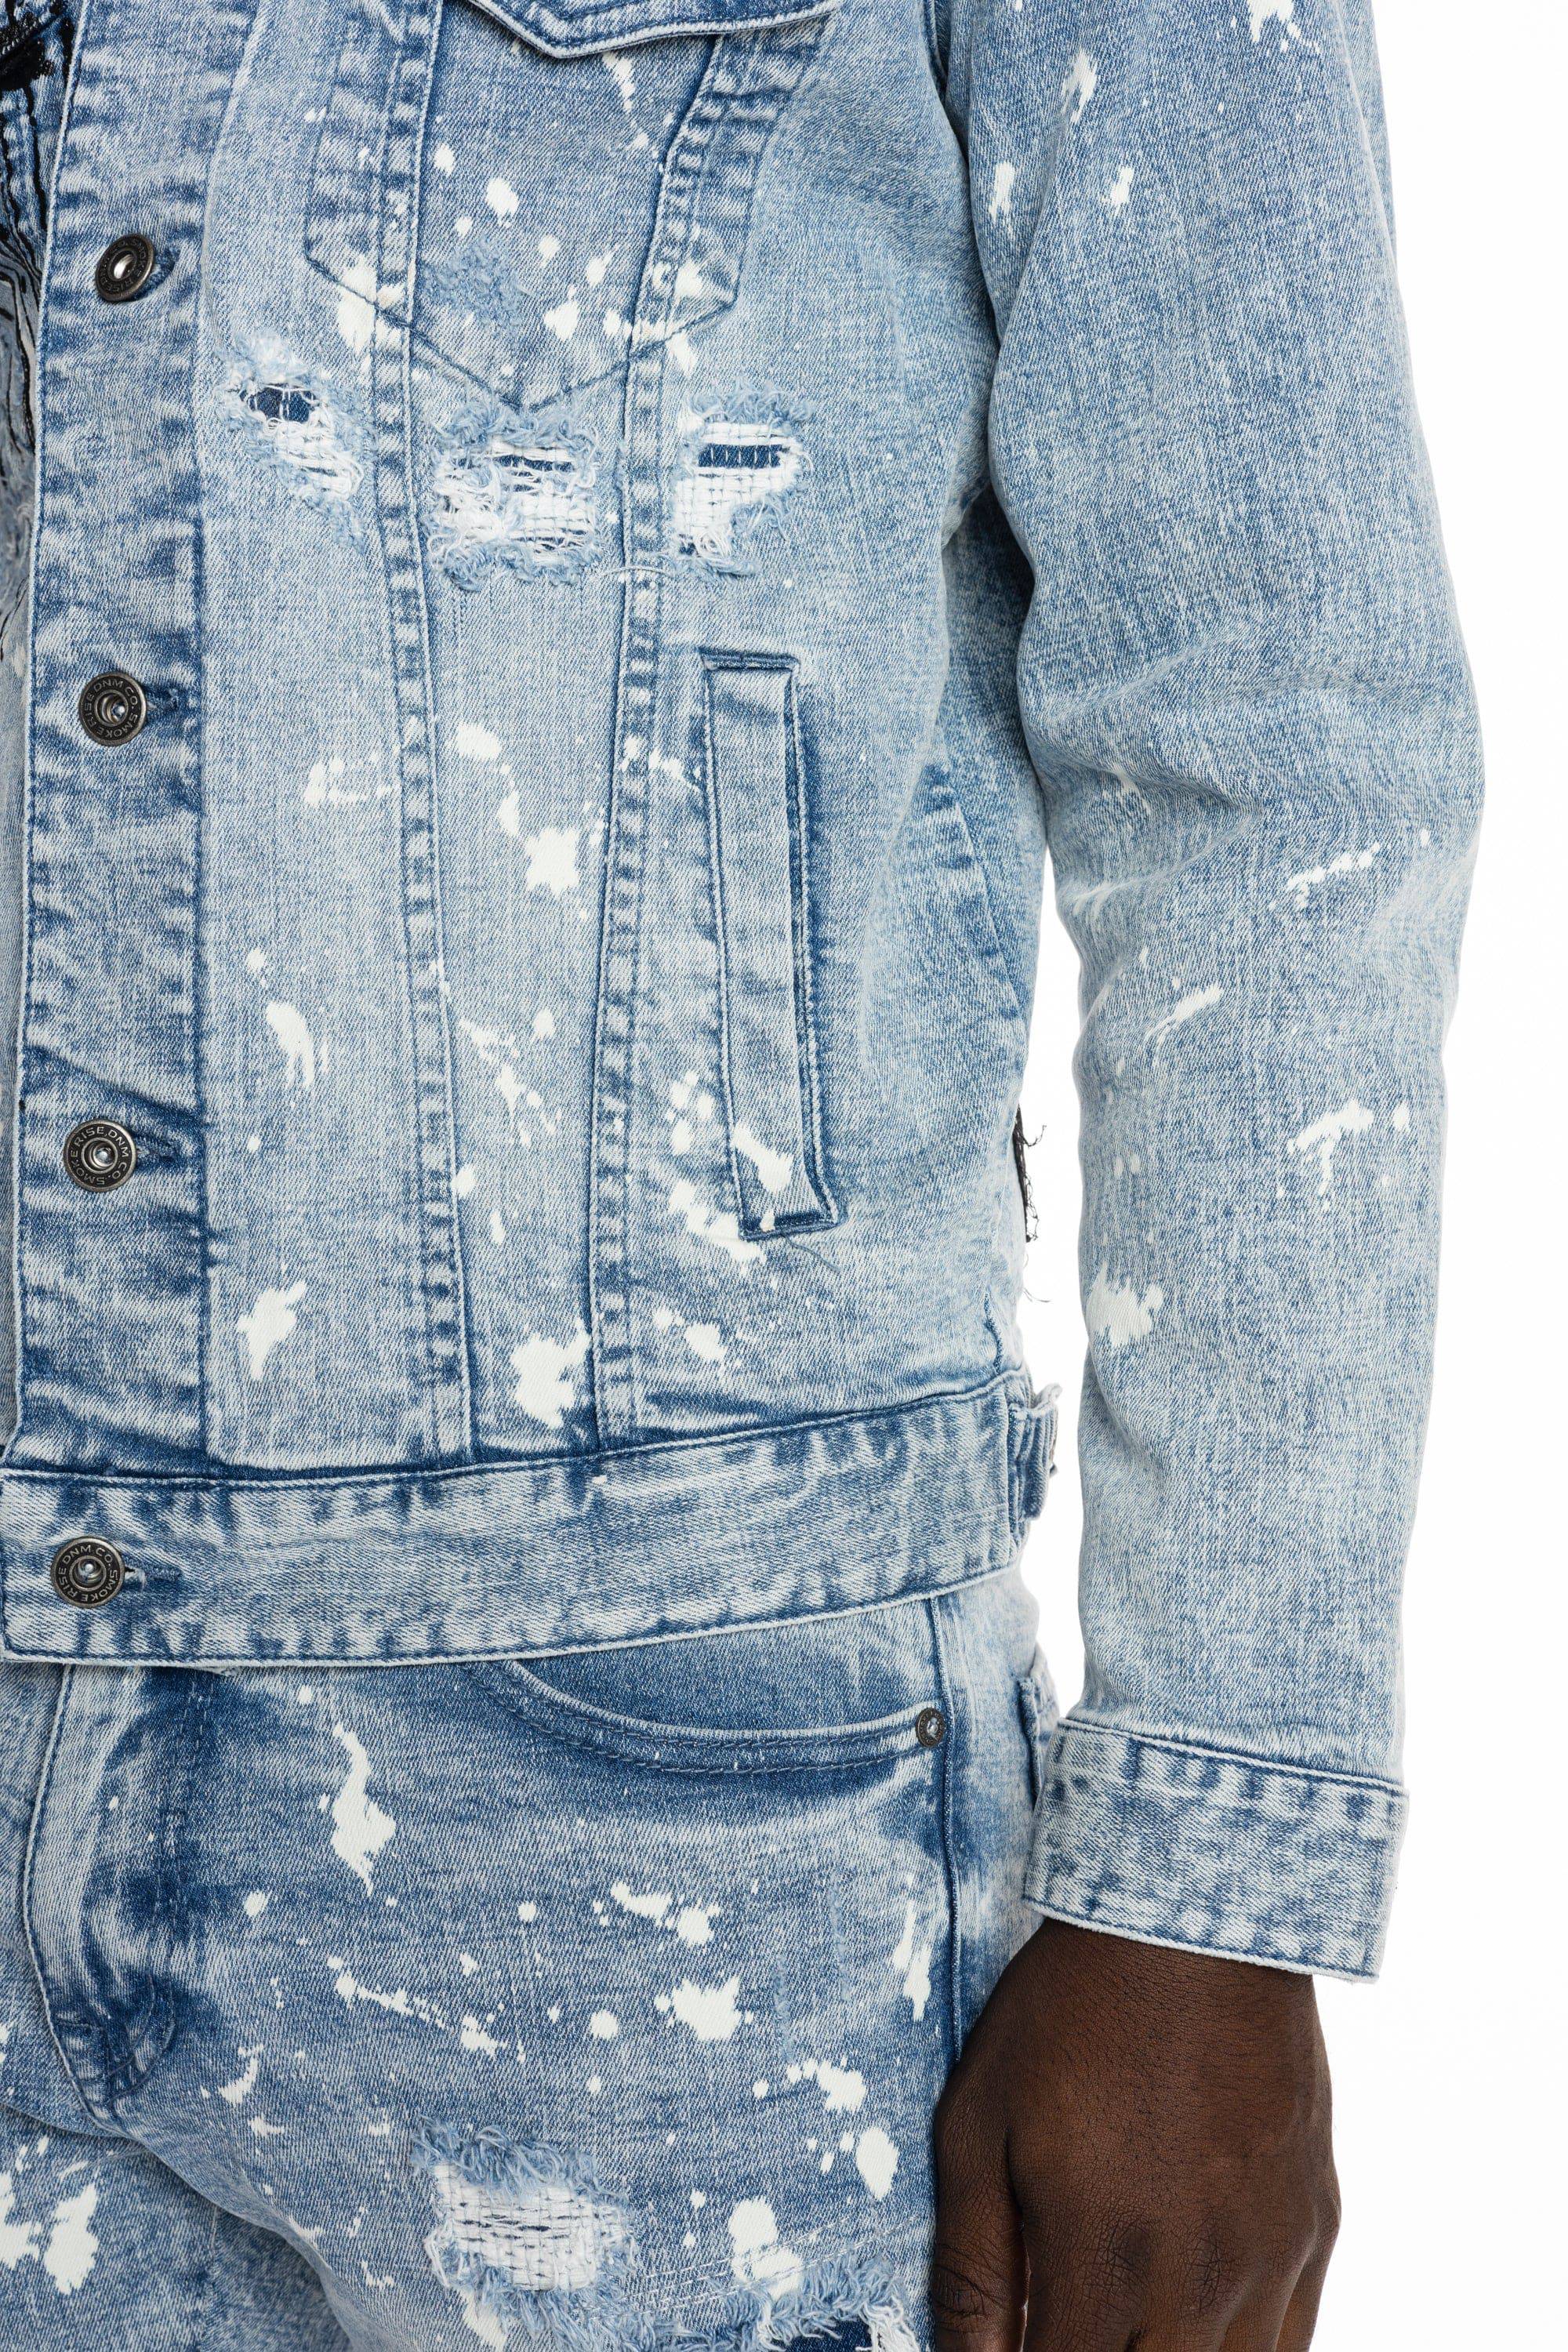 West Louis™ Ripped Ribbon Distressed Denim Jacket  Denim jacket,  Distressed denim jacket, Denim jacket patches